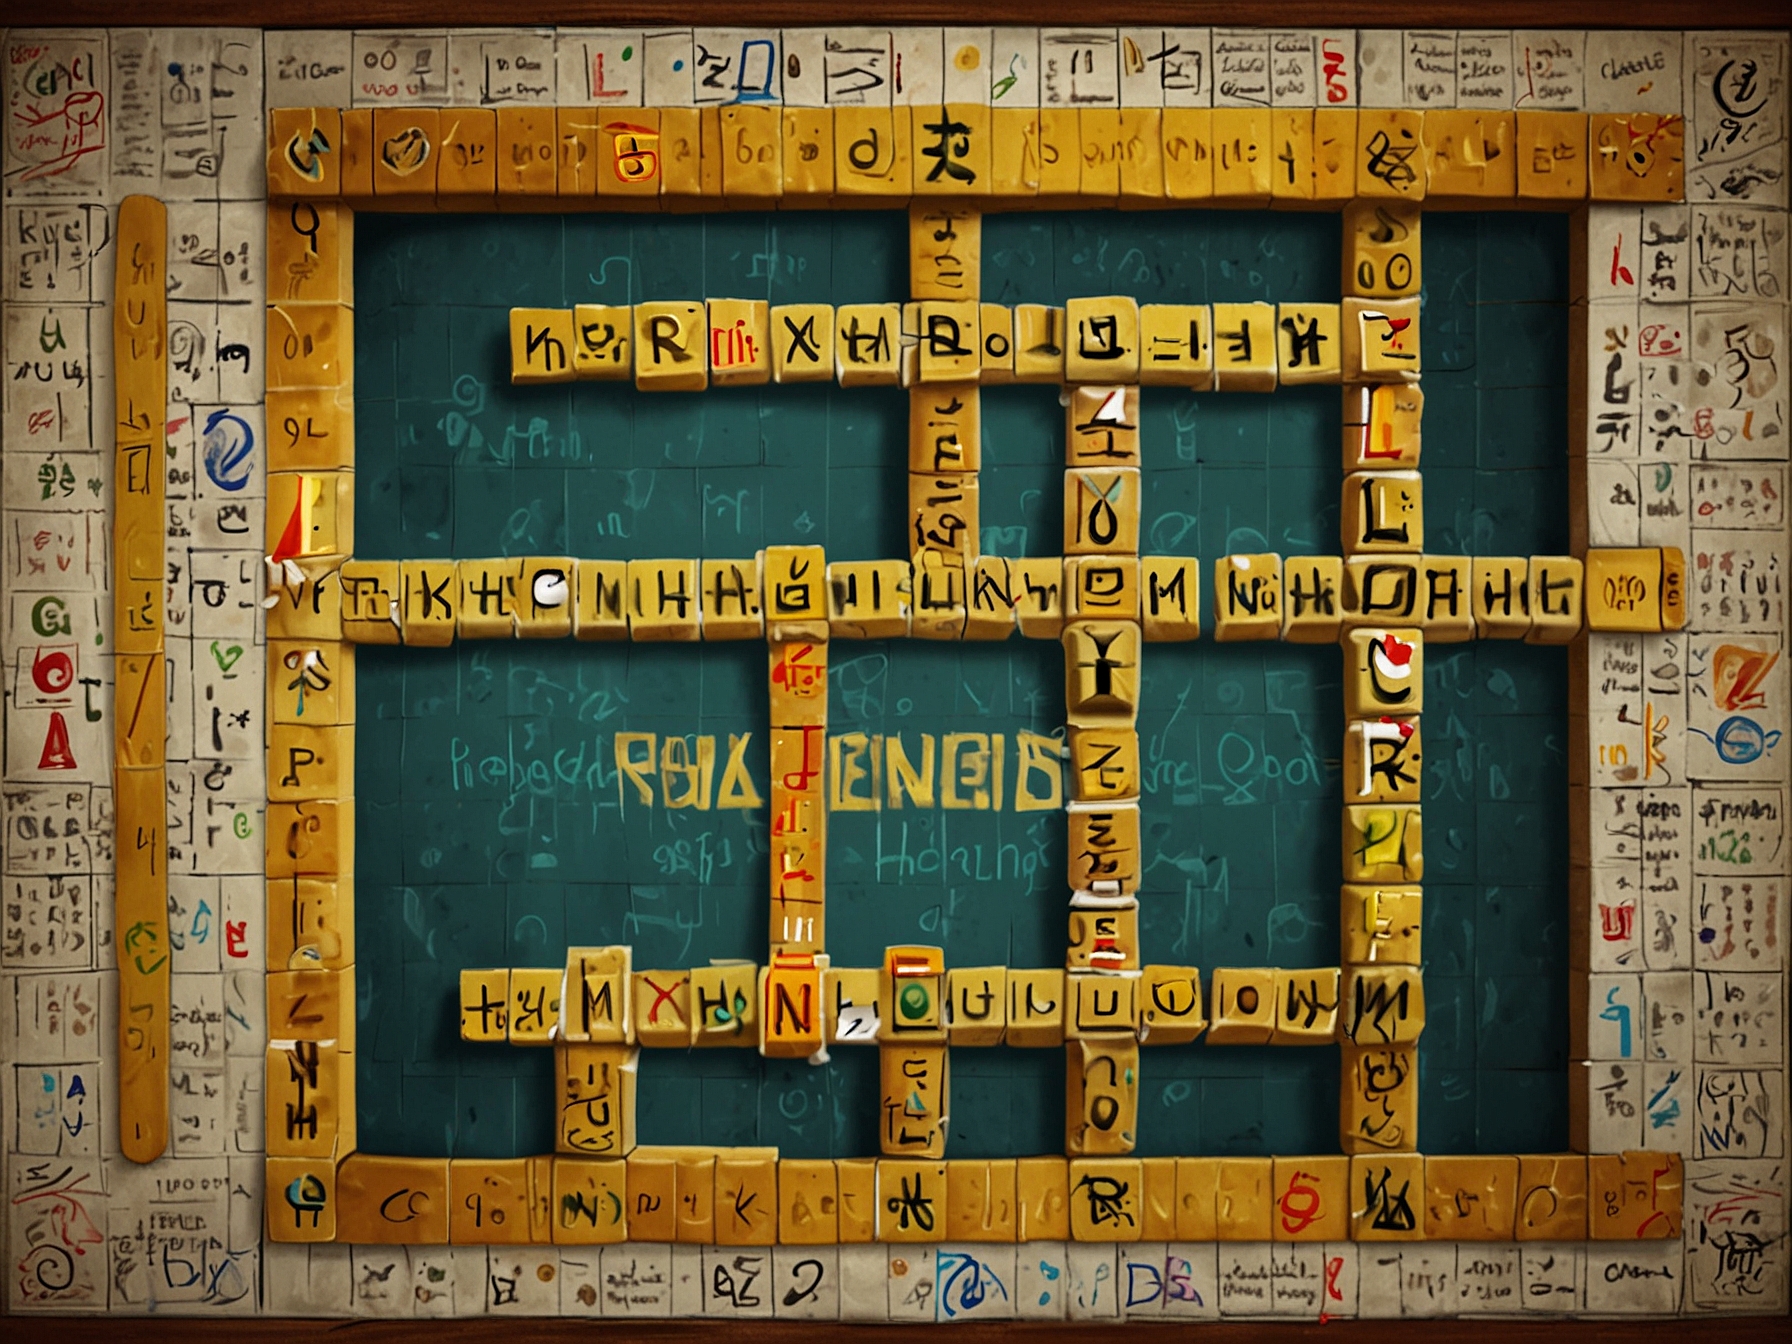 An engaging image of a NYT Strands game board with the letters A, E, L, M, N, O, and R displayed prominently. Words like 'LEMON' and 'ALMOND' are highlighted, illustrating the puzzle layout.